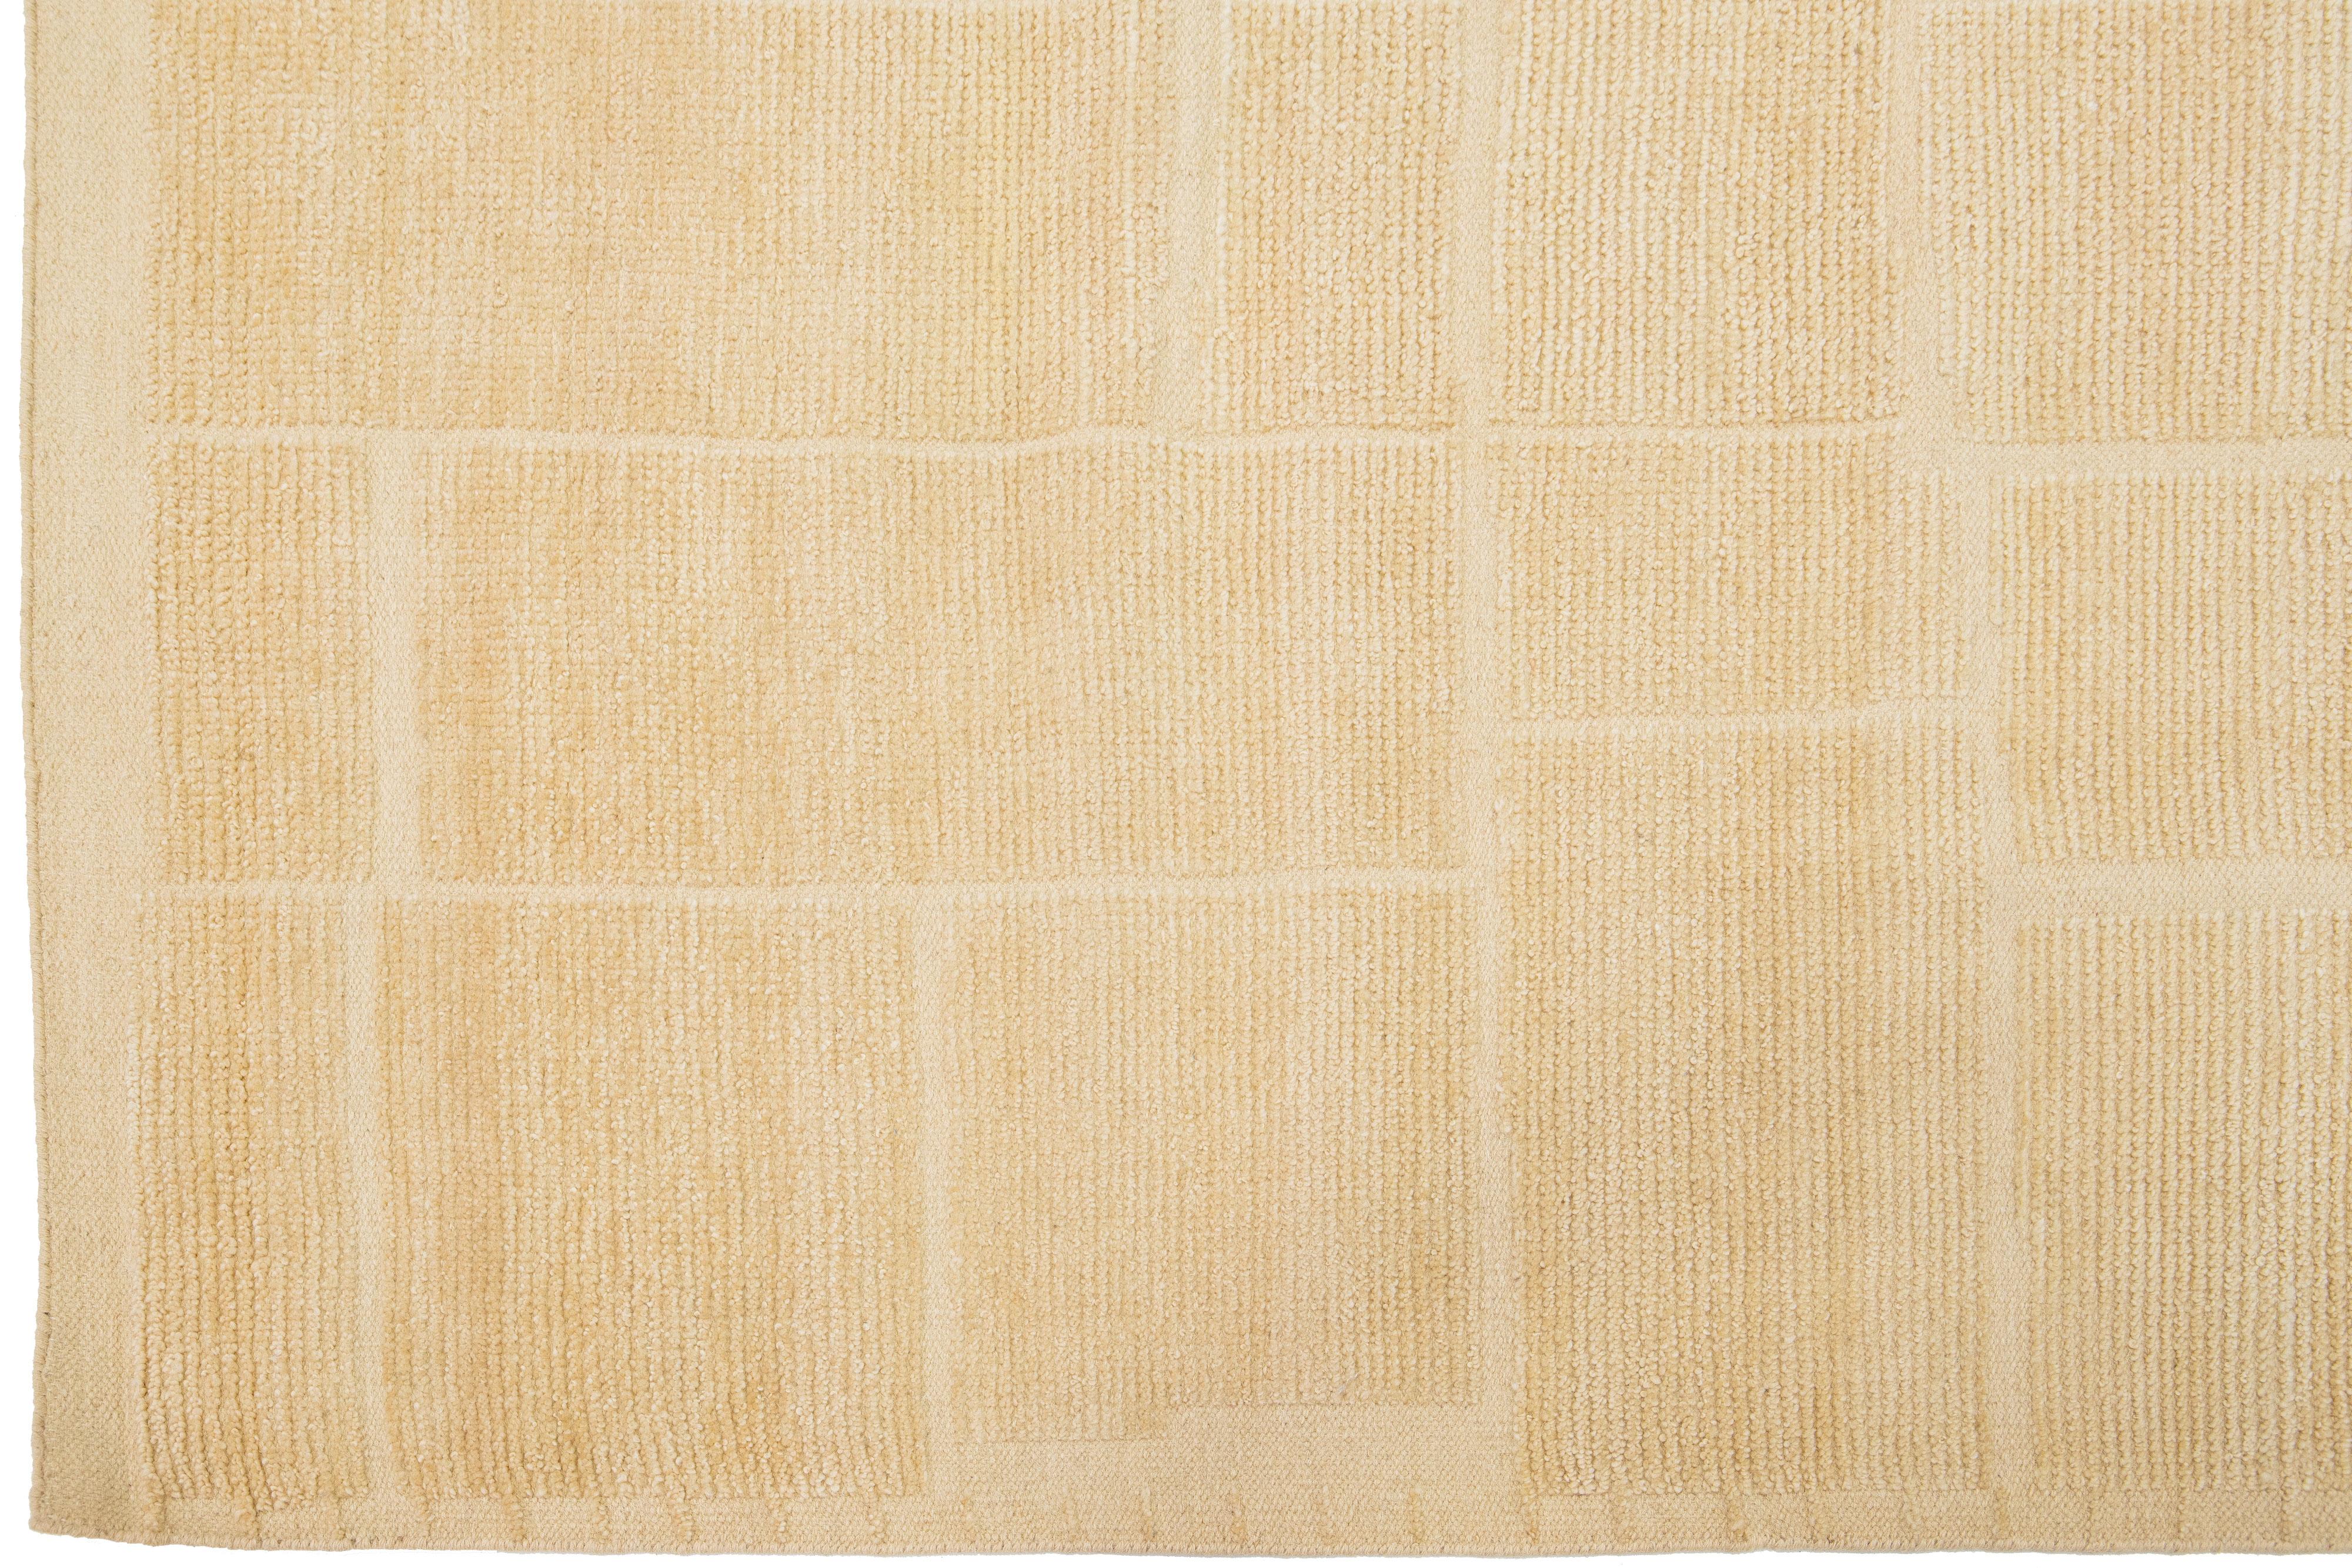 Hand-Knotted Handmade Modern Moroccan-Style Wool Rug In Beige -Tan Color By Apadana For Sale